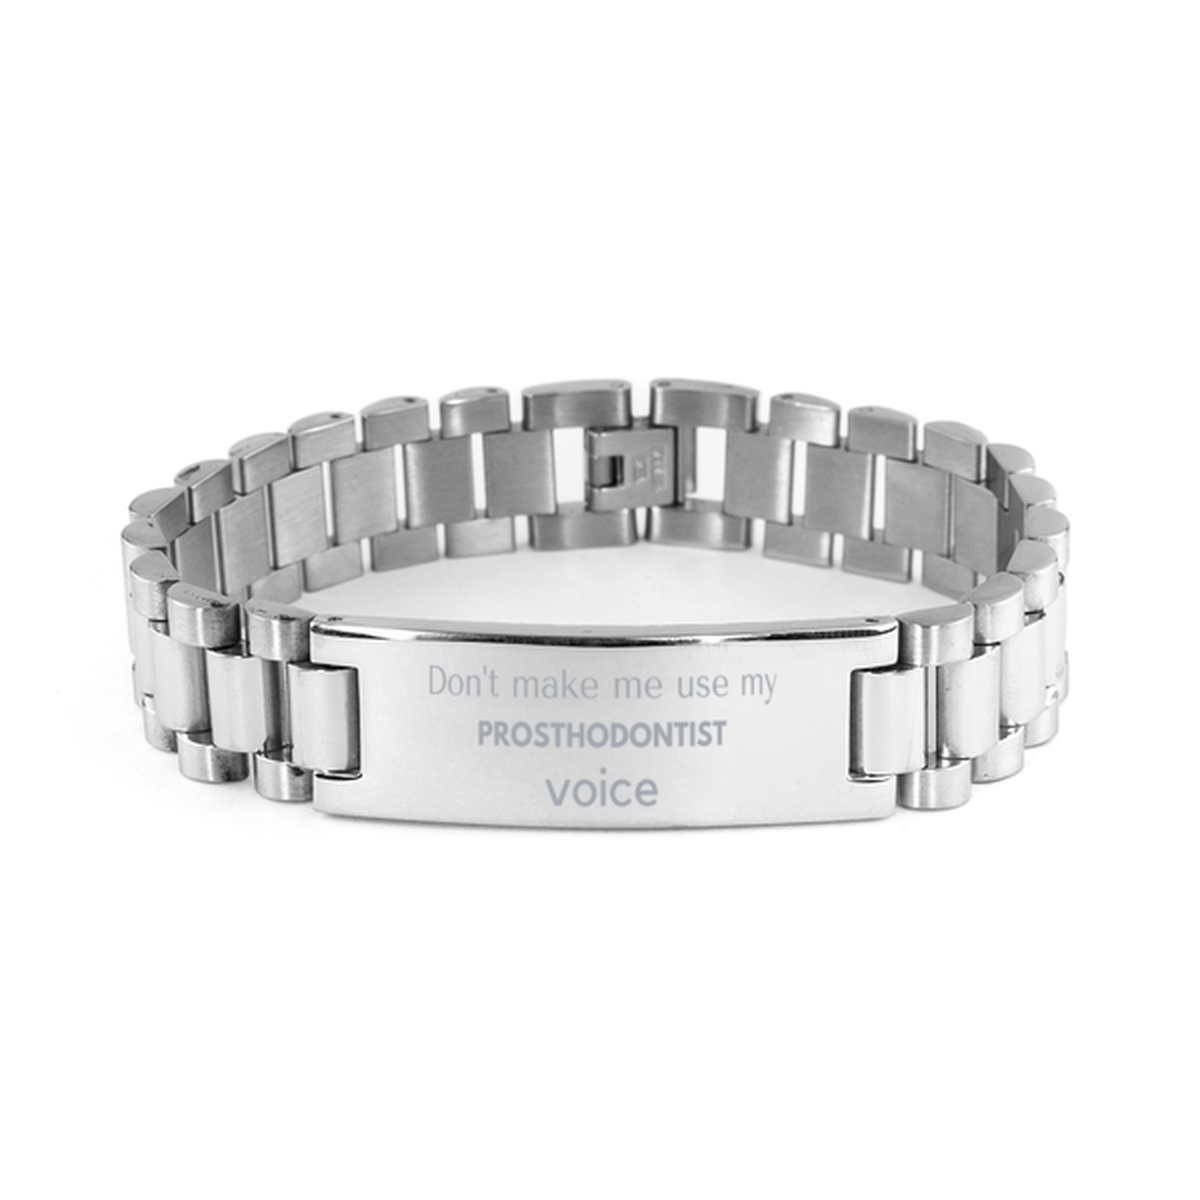 Don't make me use my Prosthodontist voice, Sarcasm Prosthodontist Gifts, Christmas Prosthodontist Ladder Stainless Steel Bracelet Birthday Unique Gifts For Prosthodontist Coworkers, Men, Women, Colleague, Friends